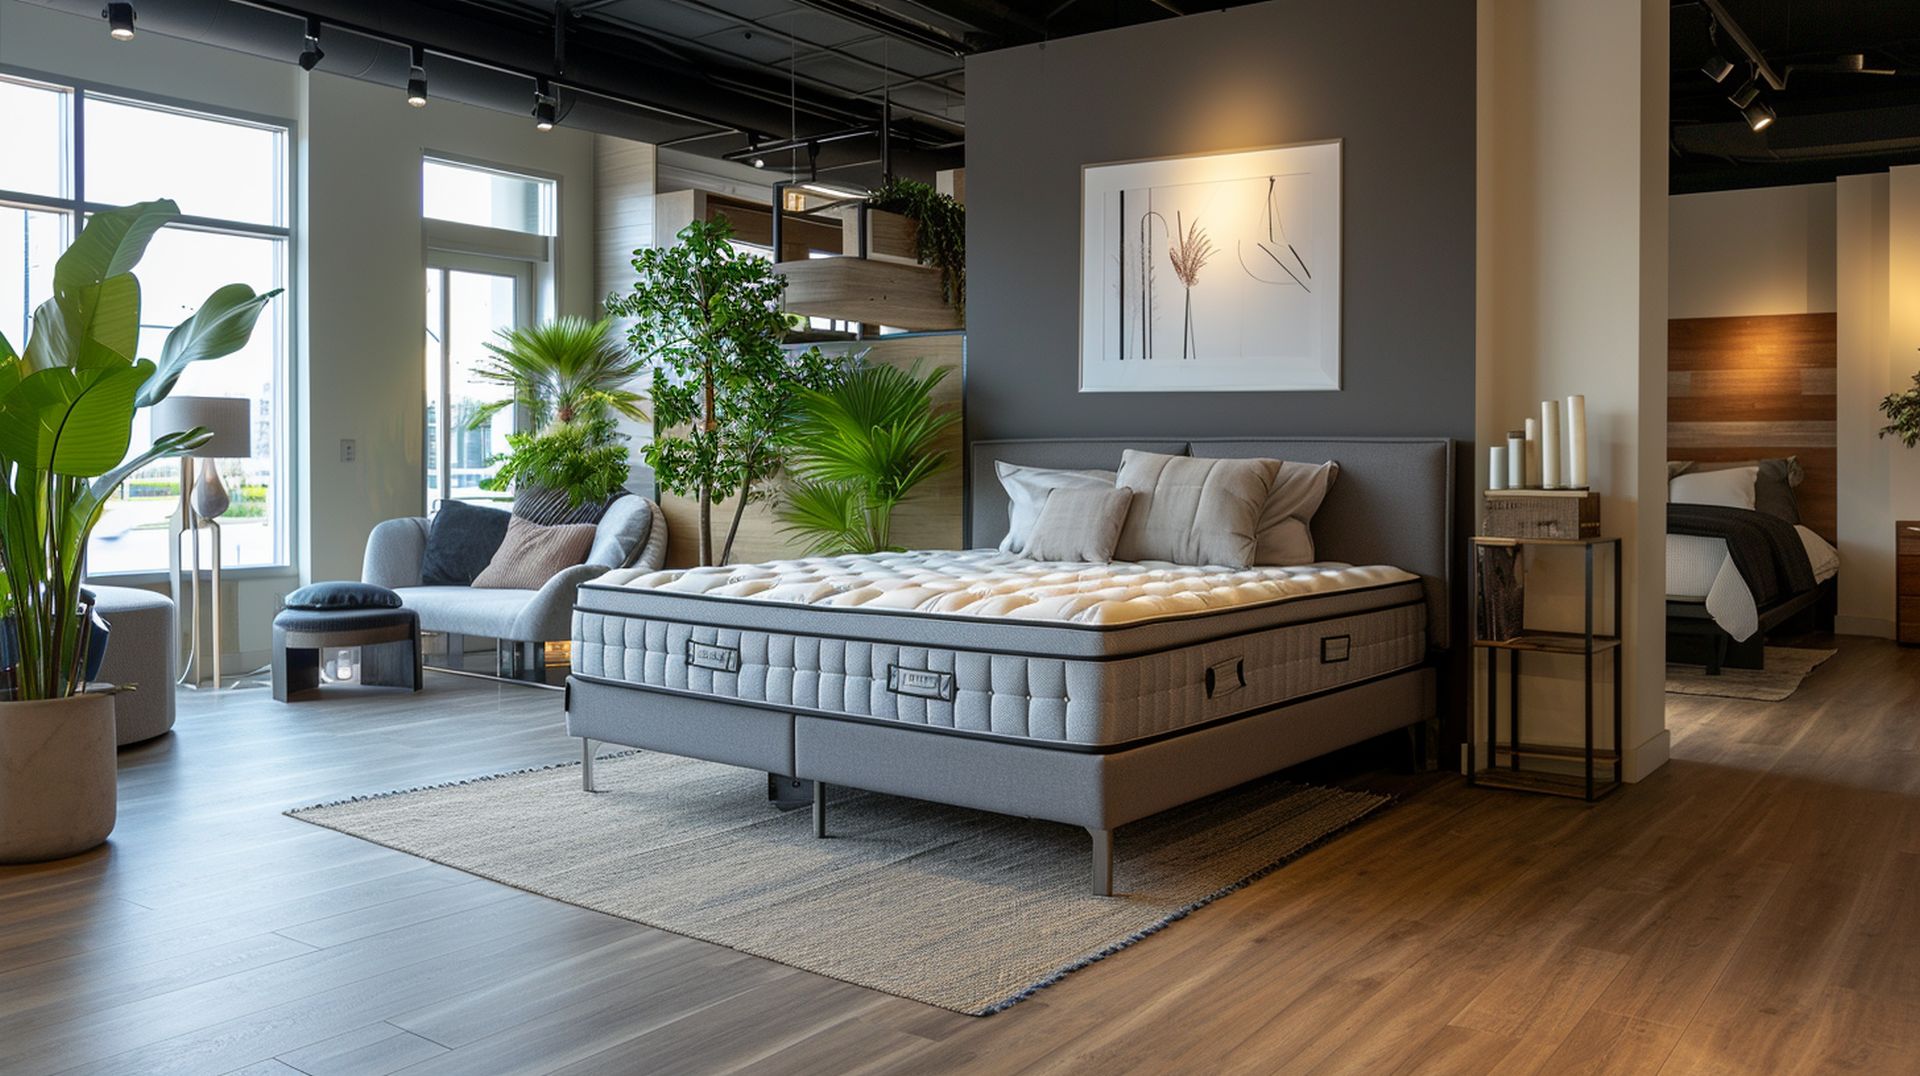 If you're looking for a new bed, mattress stores in Maple Grove offer the best customer and delivery service, financing, and warranties in Minnesota